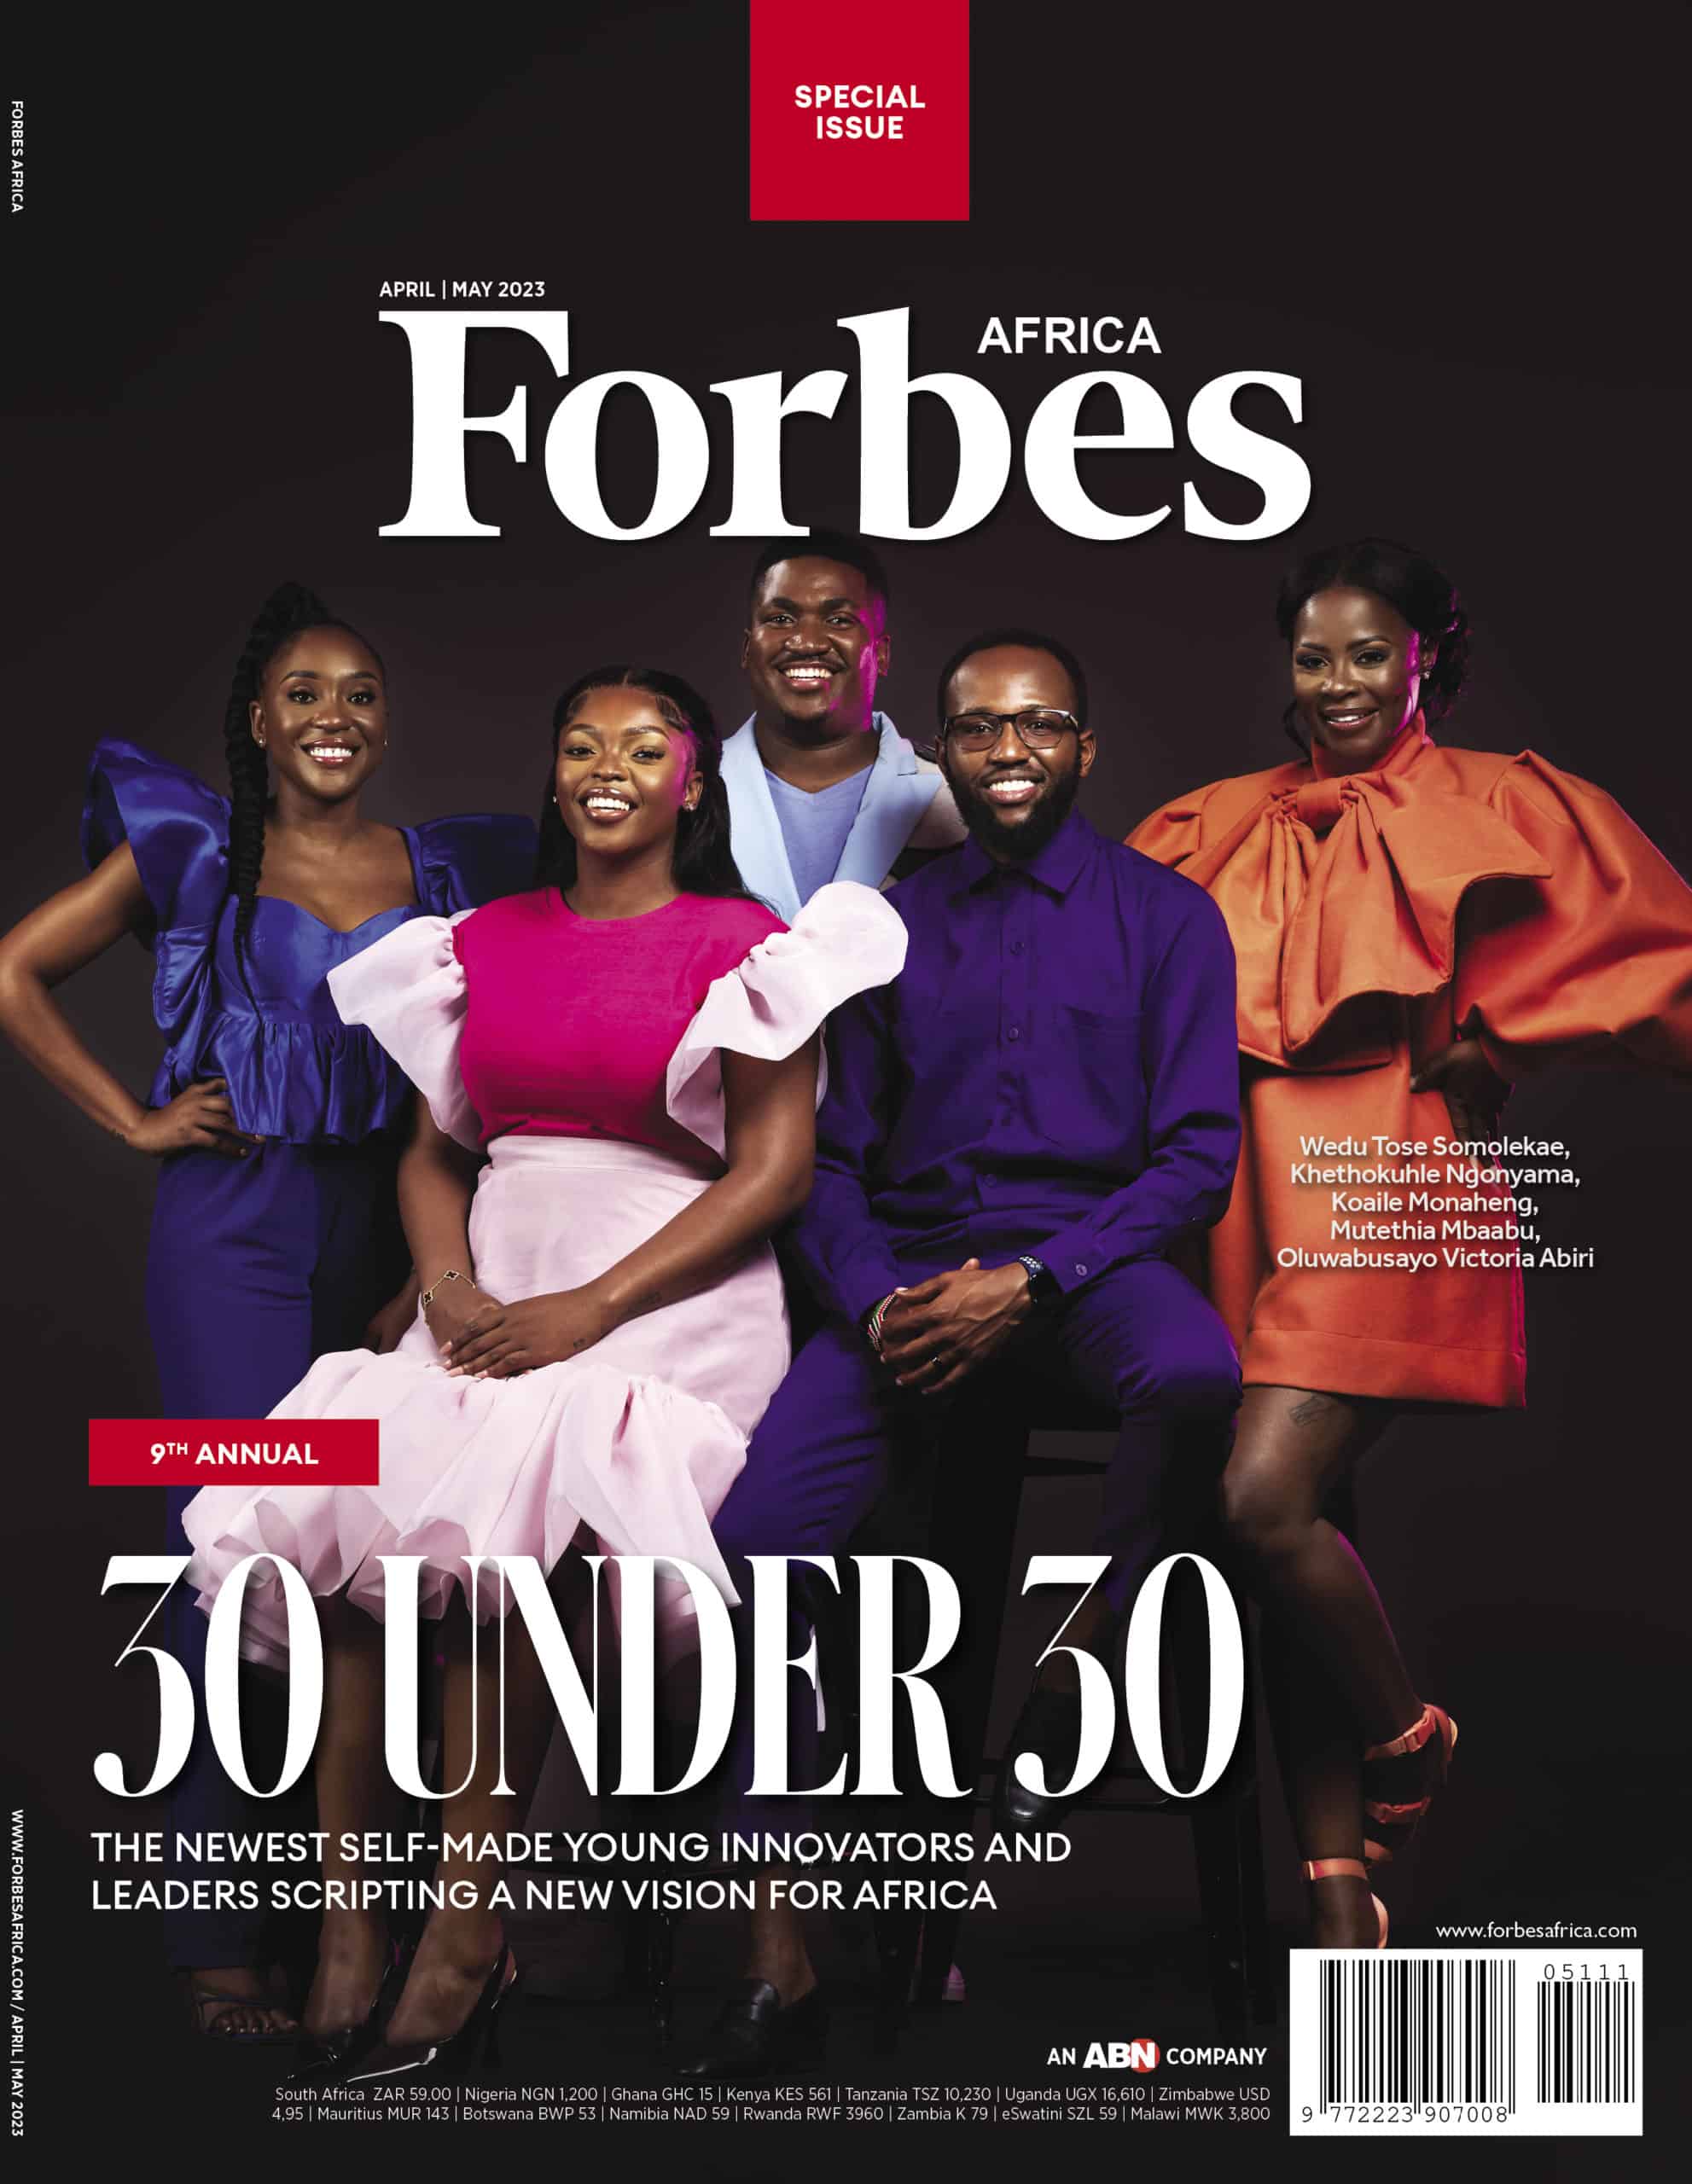 Single Digital Issue: Apr/May 2023 – Forbes Africa